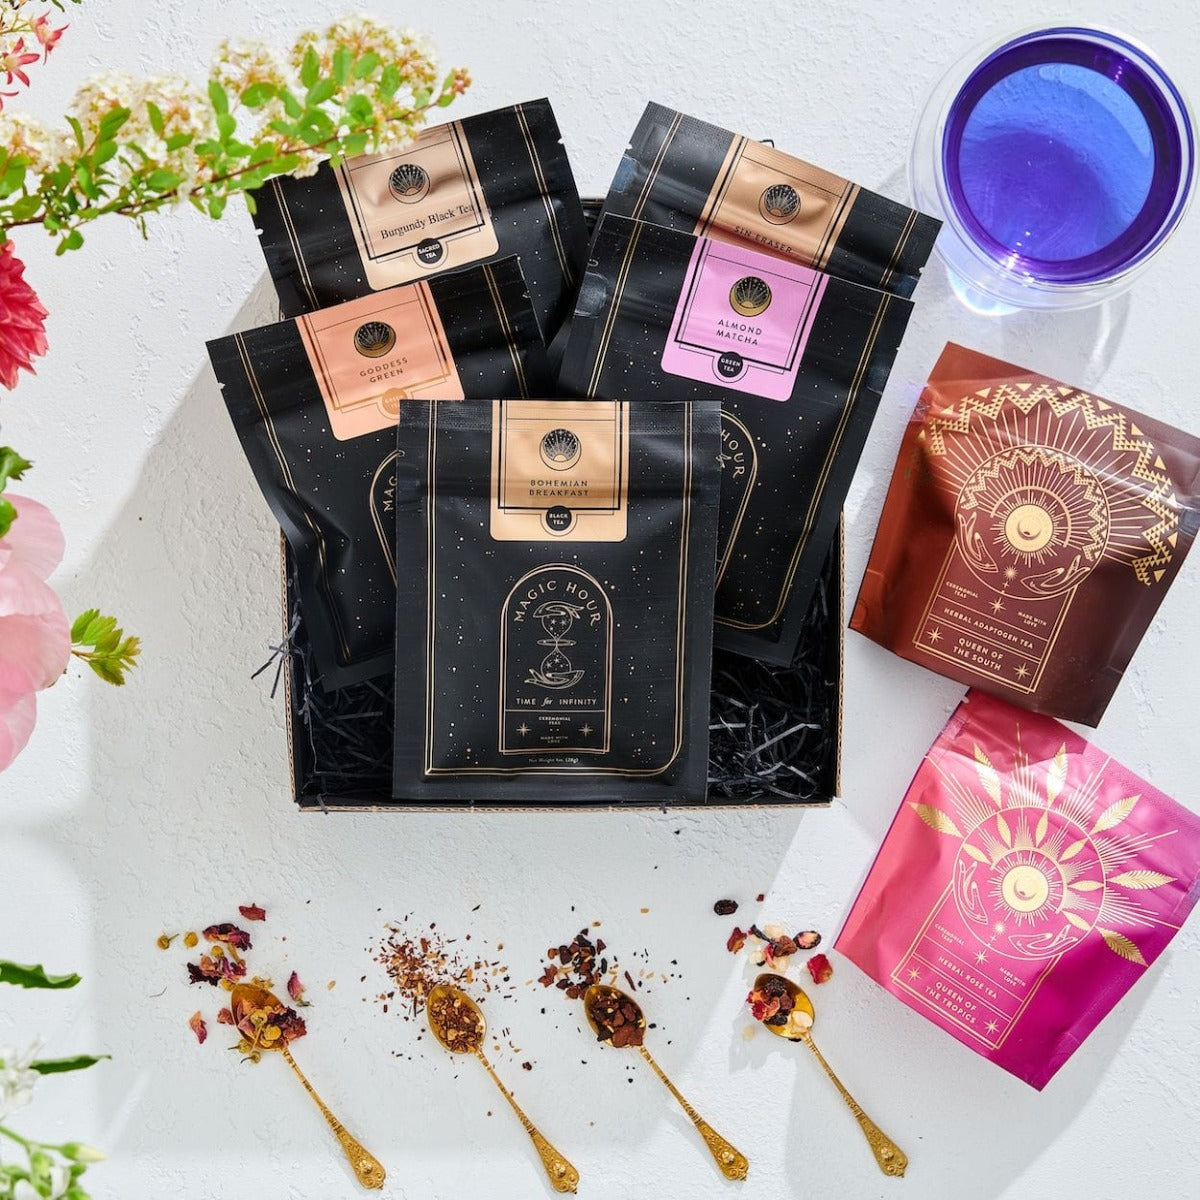 A beautifully arranged flat lay featuring various packets of Bestsellers of Magic Tea Starter Set- 60-75 cup sampler box in black, brown, and pink packaging. Also included are a blue glass, spoons with loose leaf tea and rose petals, and vibrant flowers on a white background, capturing the essence of Magic Hour.